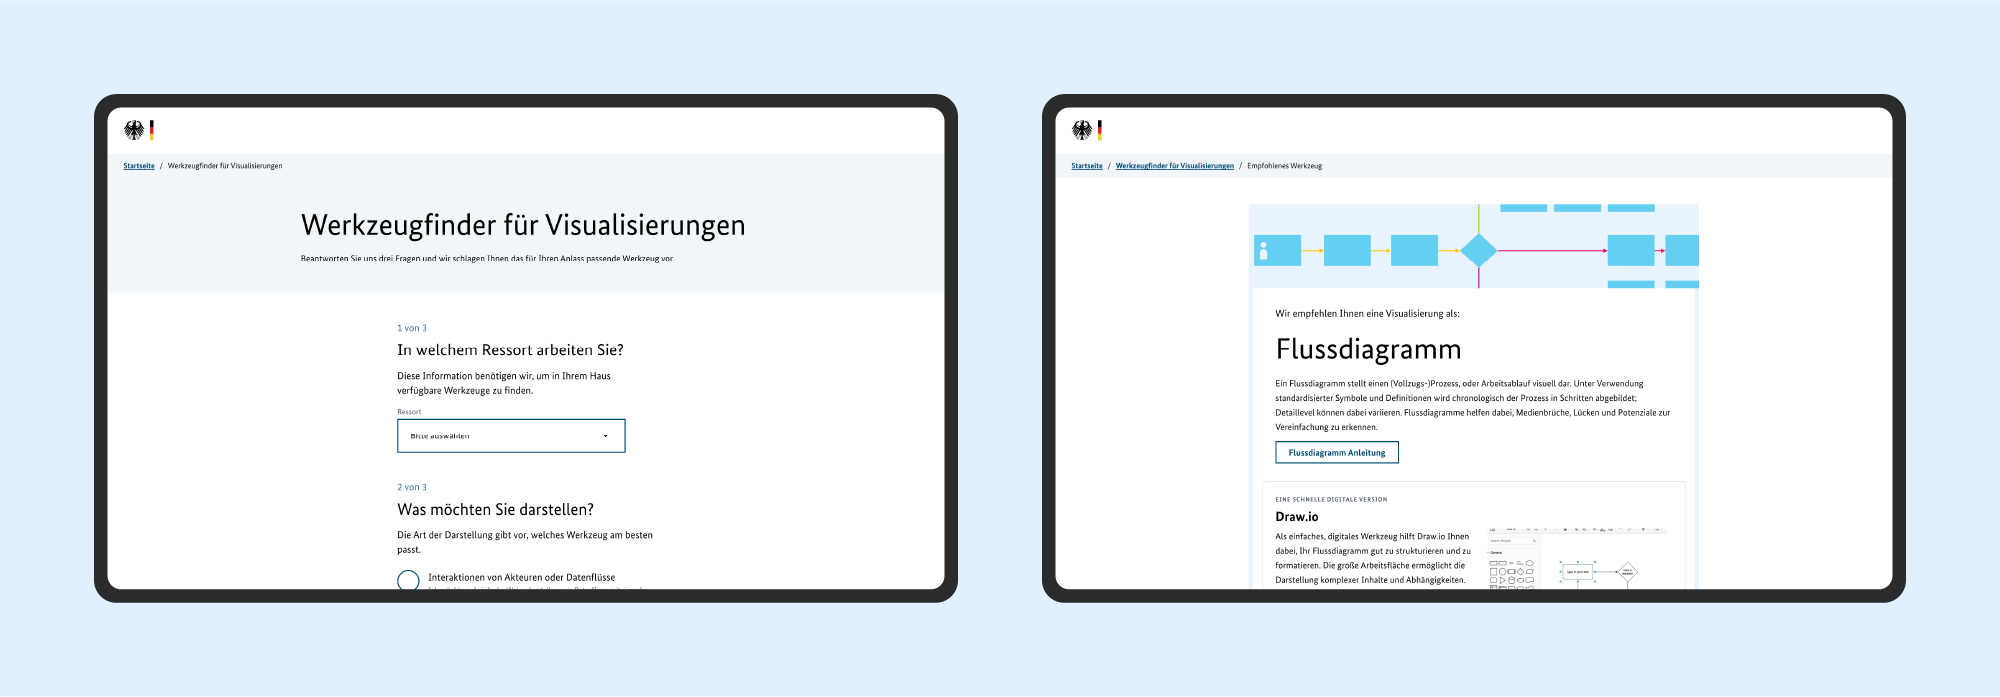 The user interface of the tool finder prototype is shown on two screens side by side